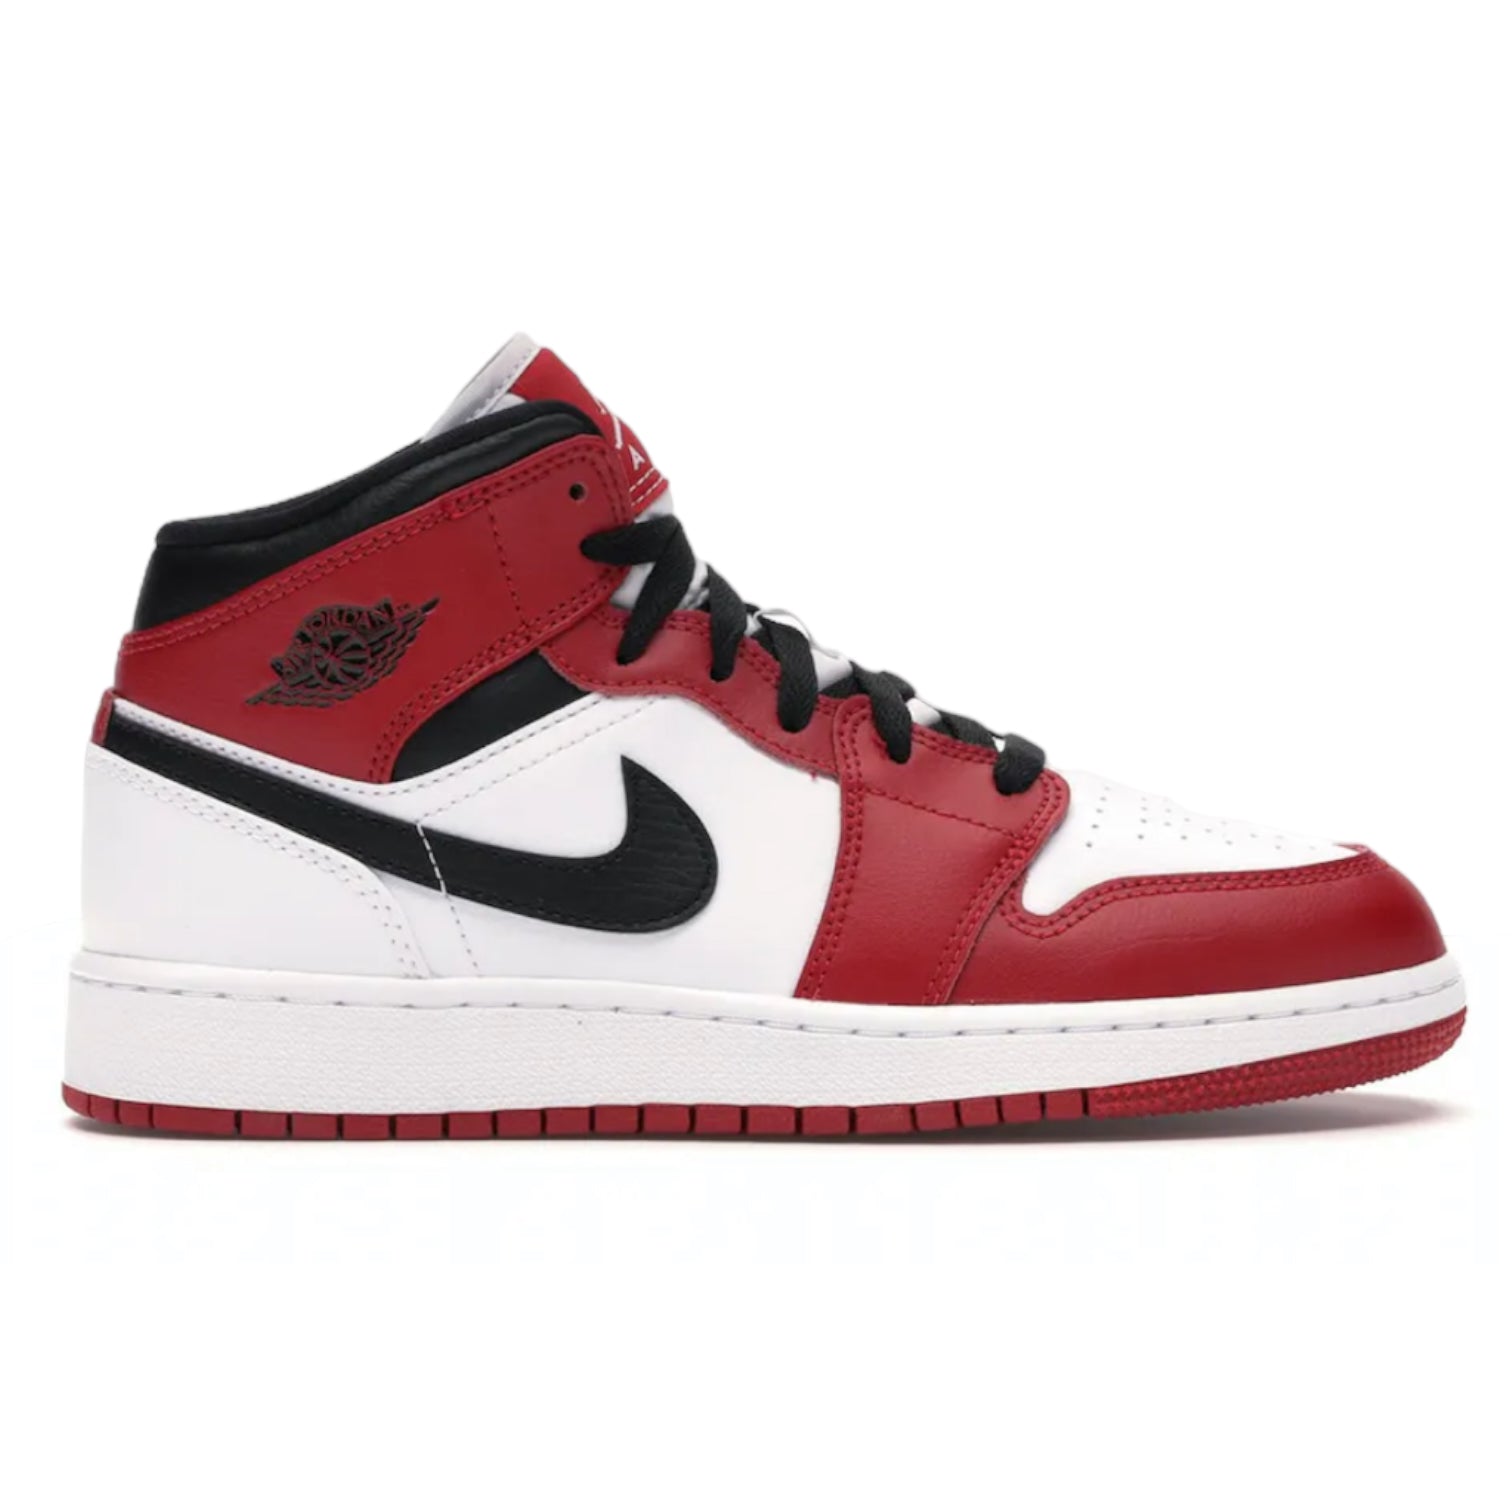 Jordan 1 Mid Chicago White Heel - Red and White Sneakers (Steal)